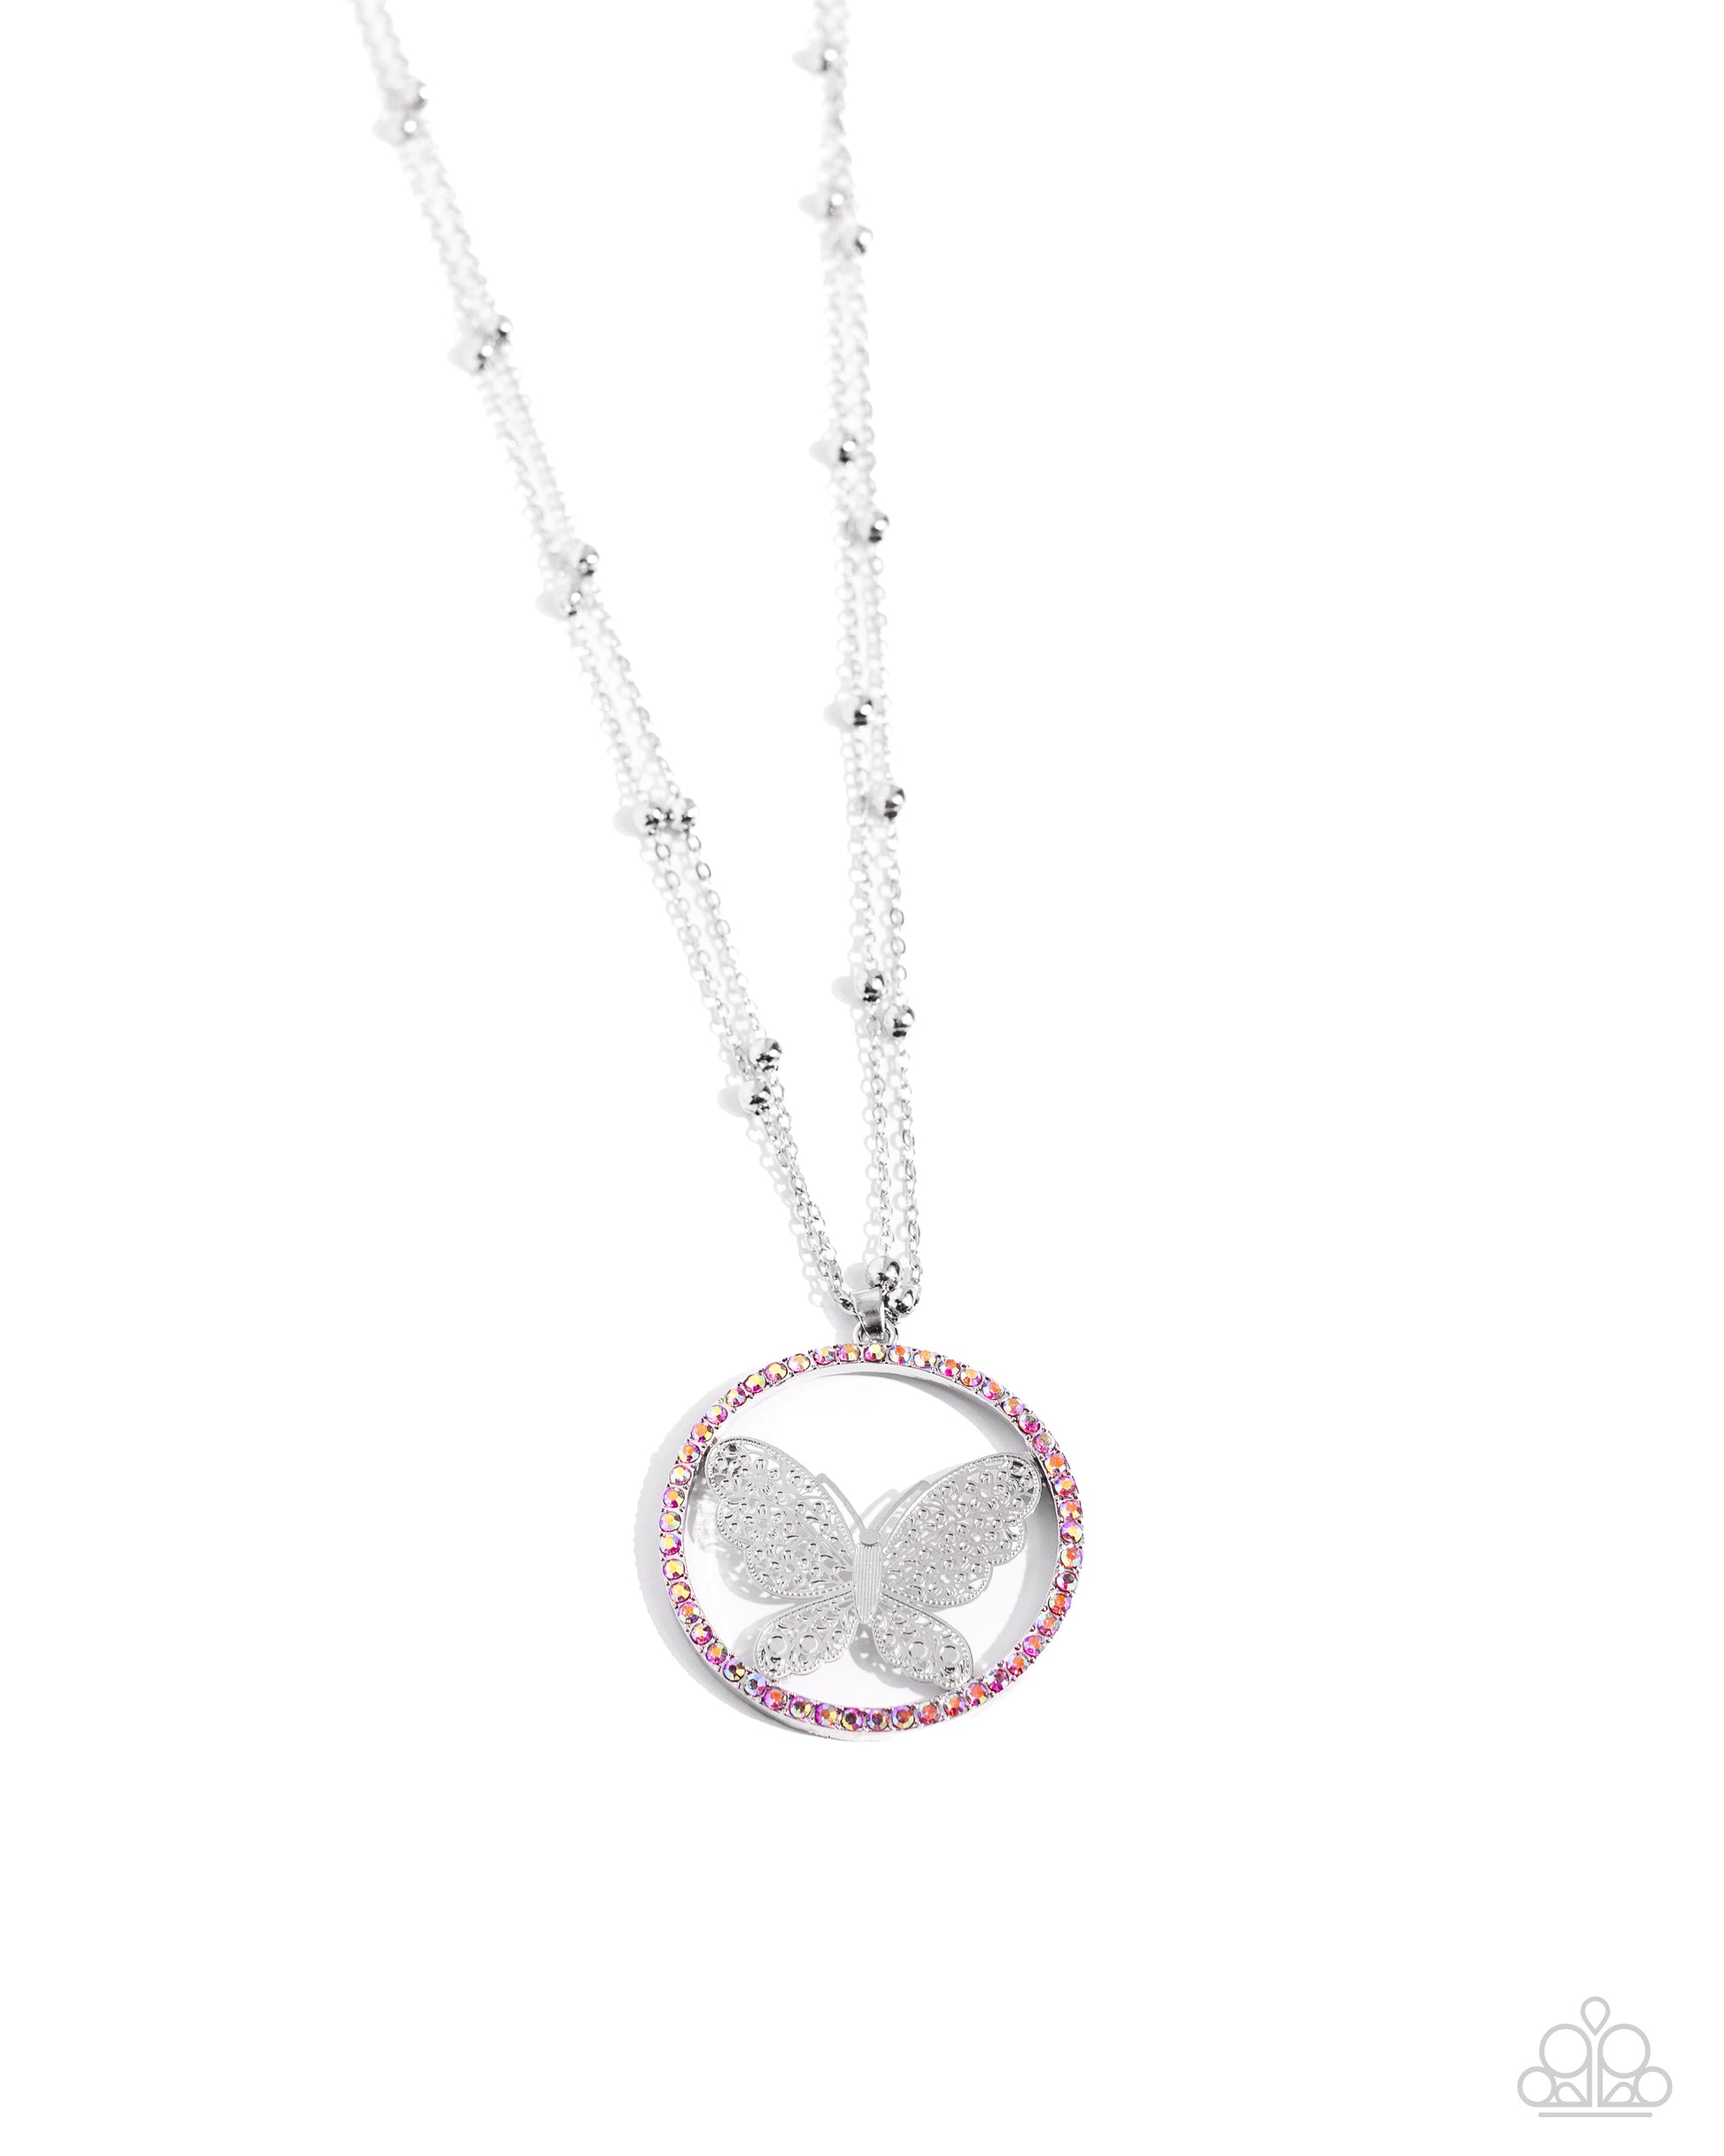 <p>Fluttering along a double-stranded silver satellite chain, a silver filigree butterfly, centered in a pink-iridescent rhinestone border twinkles below the neckline for a whimsical statement. Features an adjustable clasp closure. Due to its prismatic palette, color may vary.</p> <p><i> Sold as one individual necklace. Includes one pair of matching earrings.</i></p>